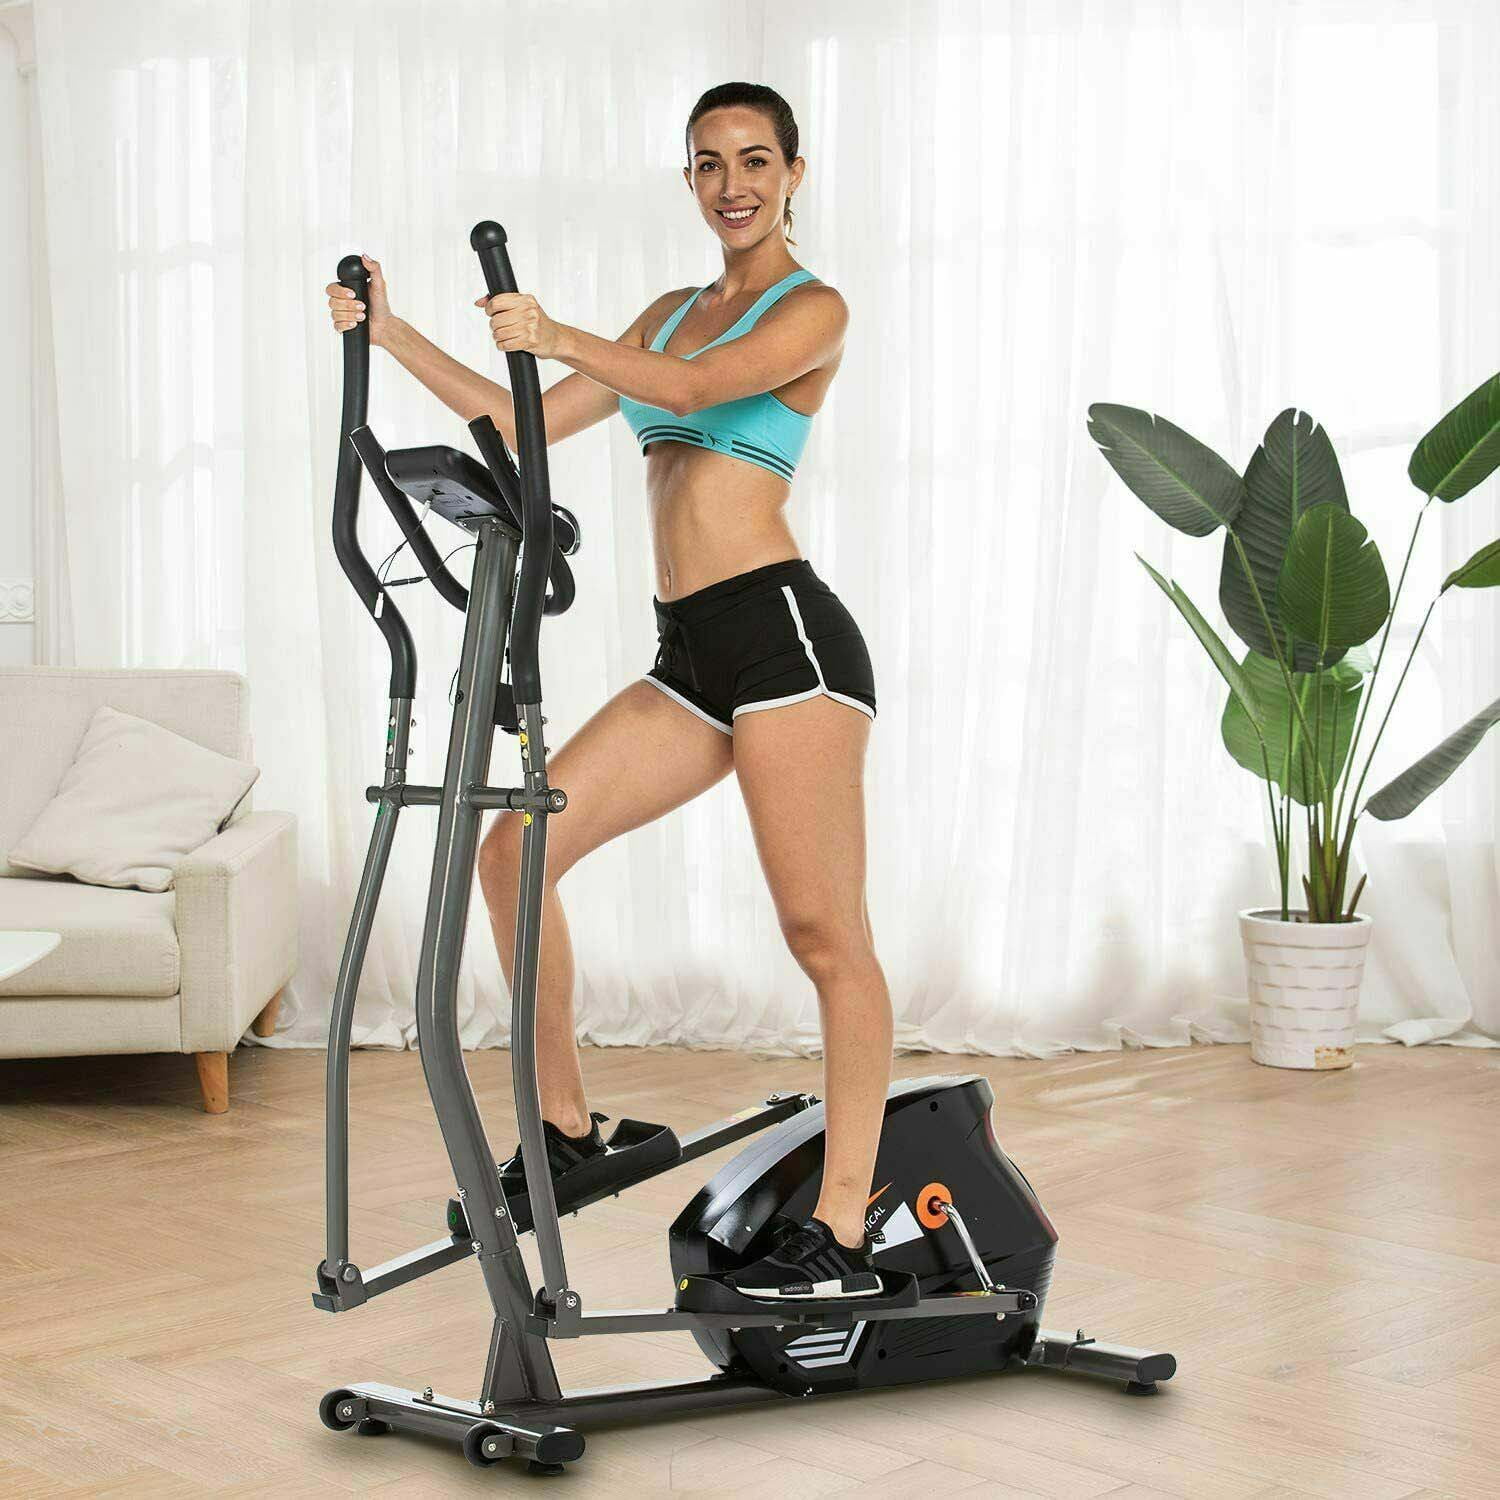 Elliptical Training Machines with 8 Level Magnetic Resistance FUNMILY Elliptical Machine for Home Use Pulse Rate Grips LCD Monitor Smooth Quiet Driven Cardio Cross Trainer 